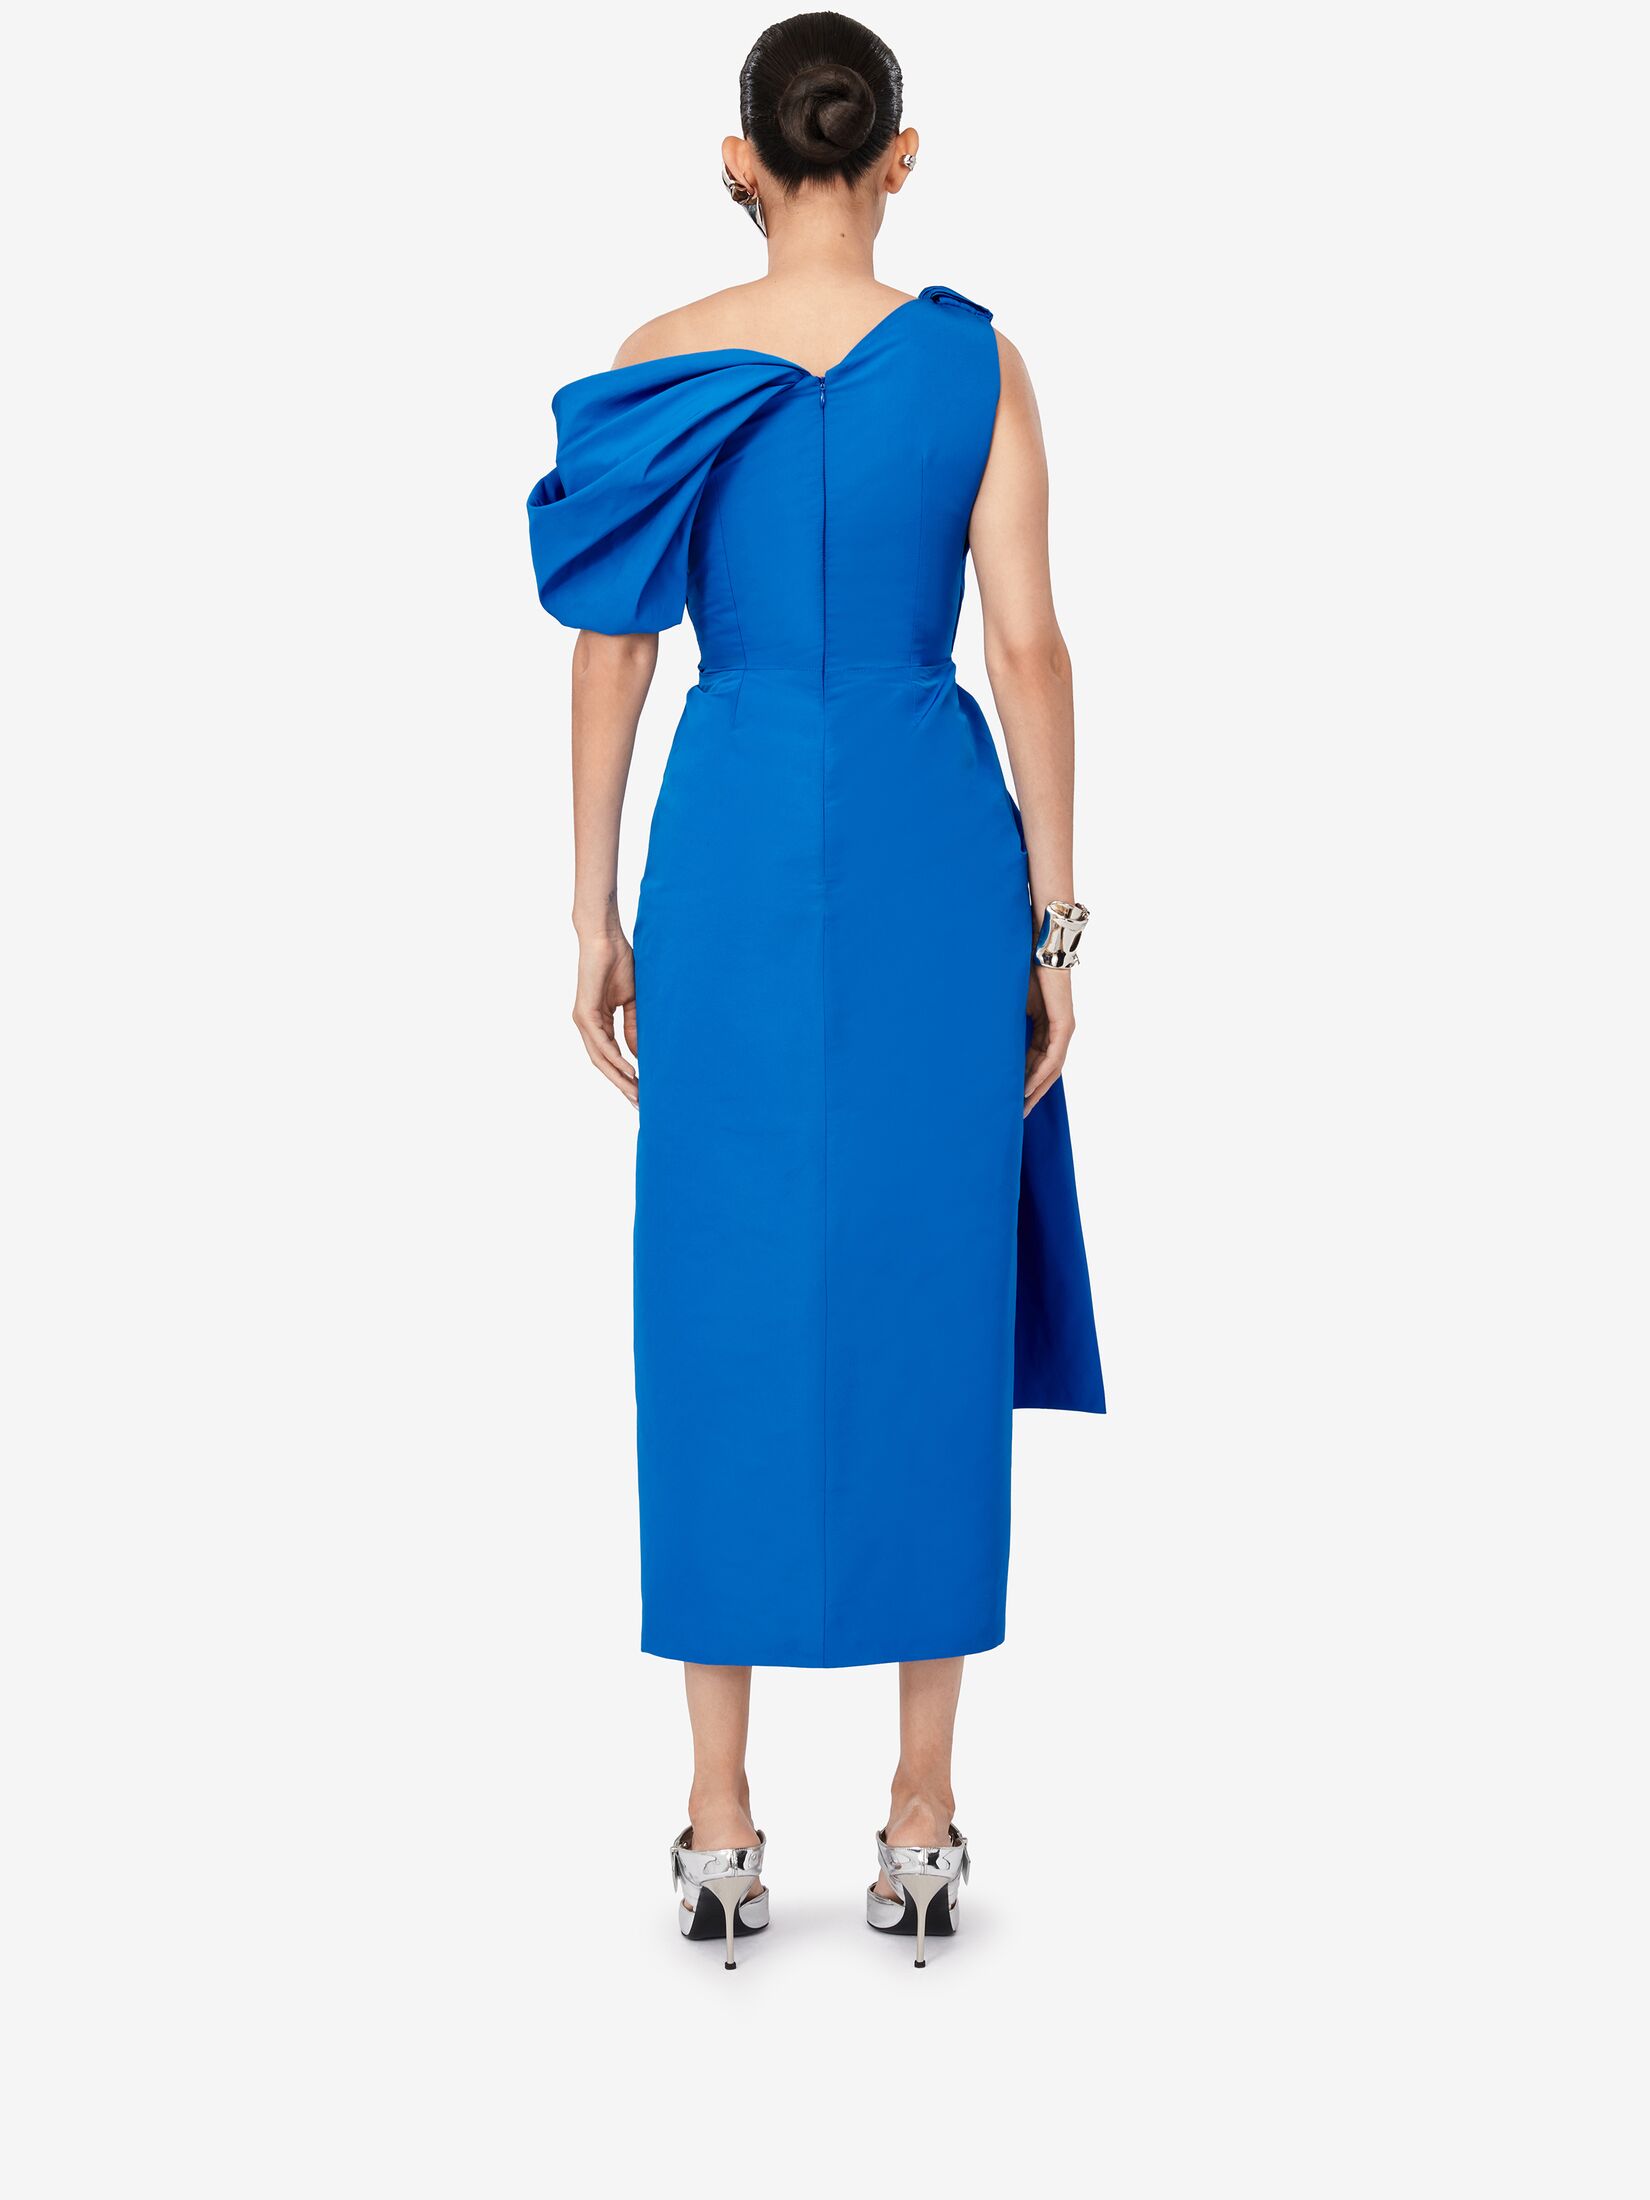 Knotted Asymmetric Pencil Dress